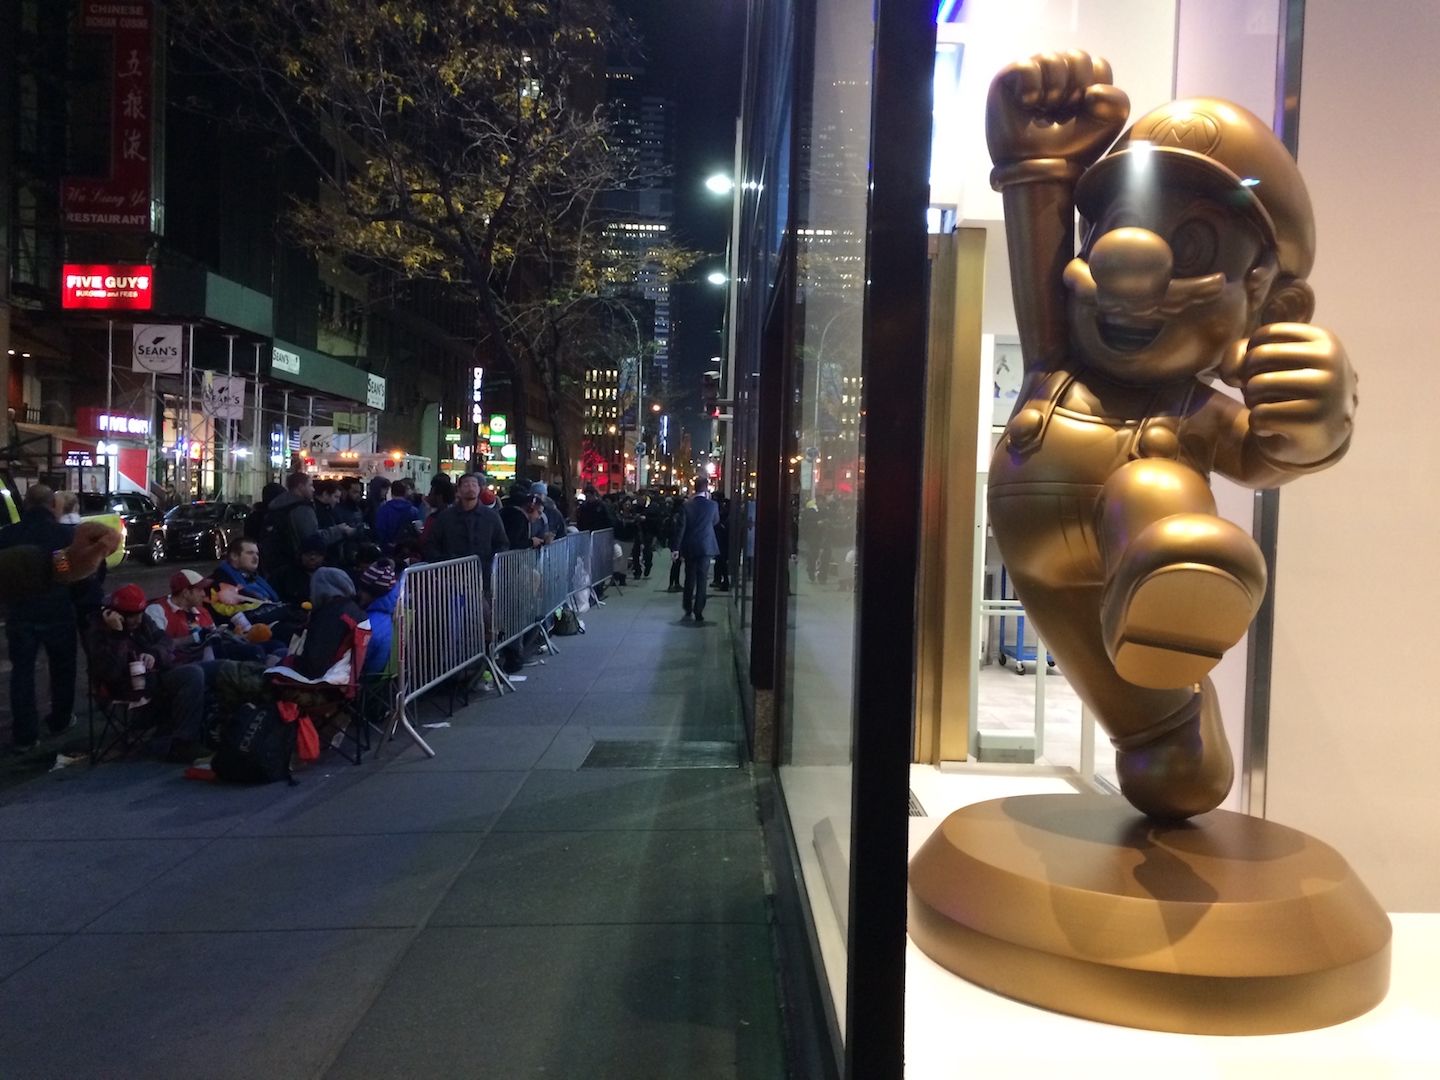 A lineup in front of the Nintendo NYC Store, with a golden-coloured Mario statue in the shop's window.